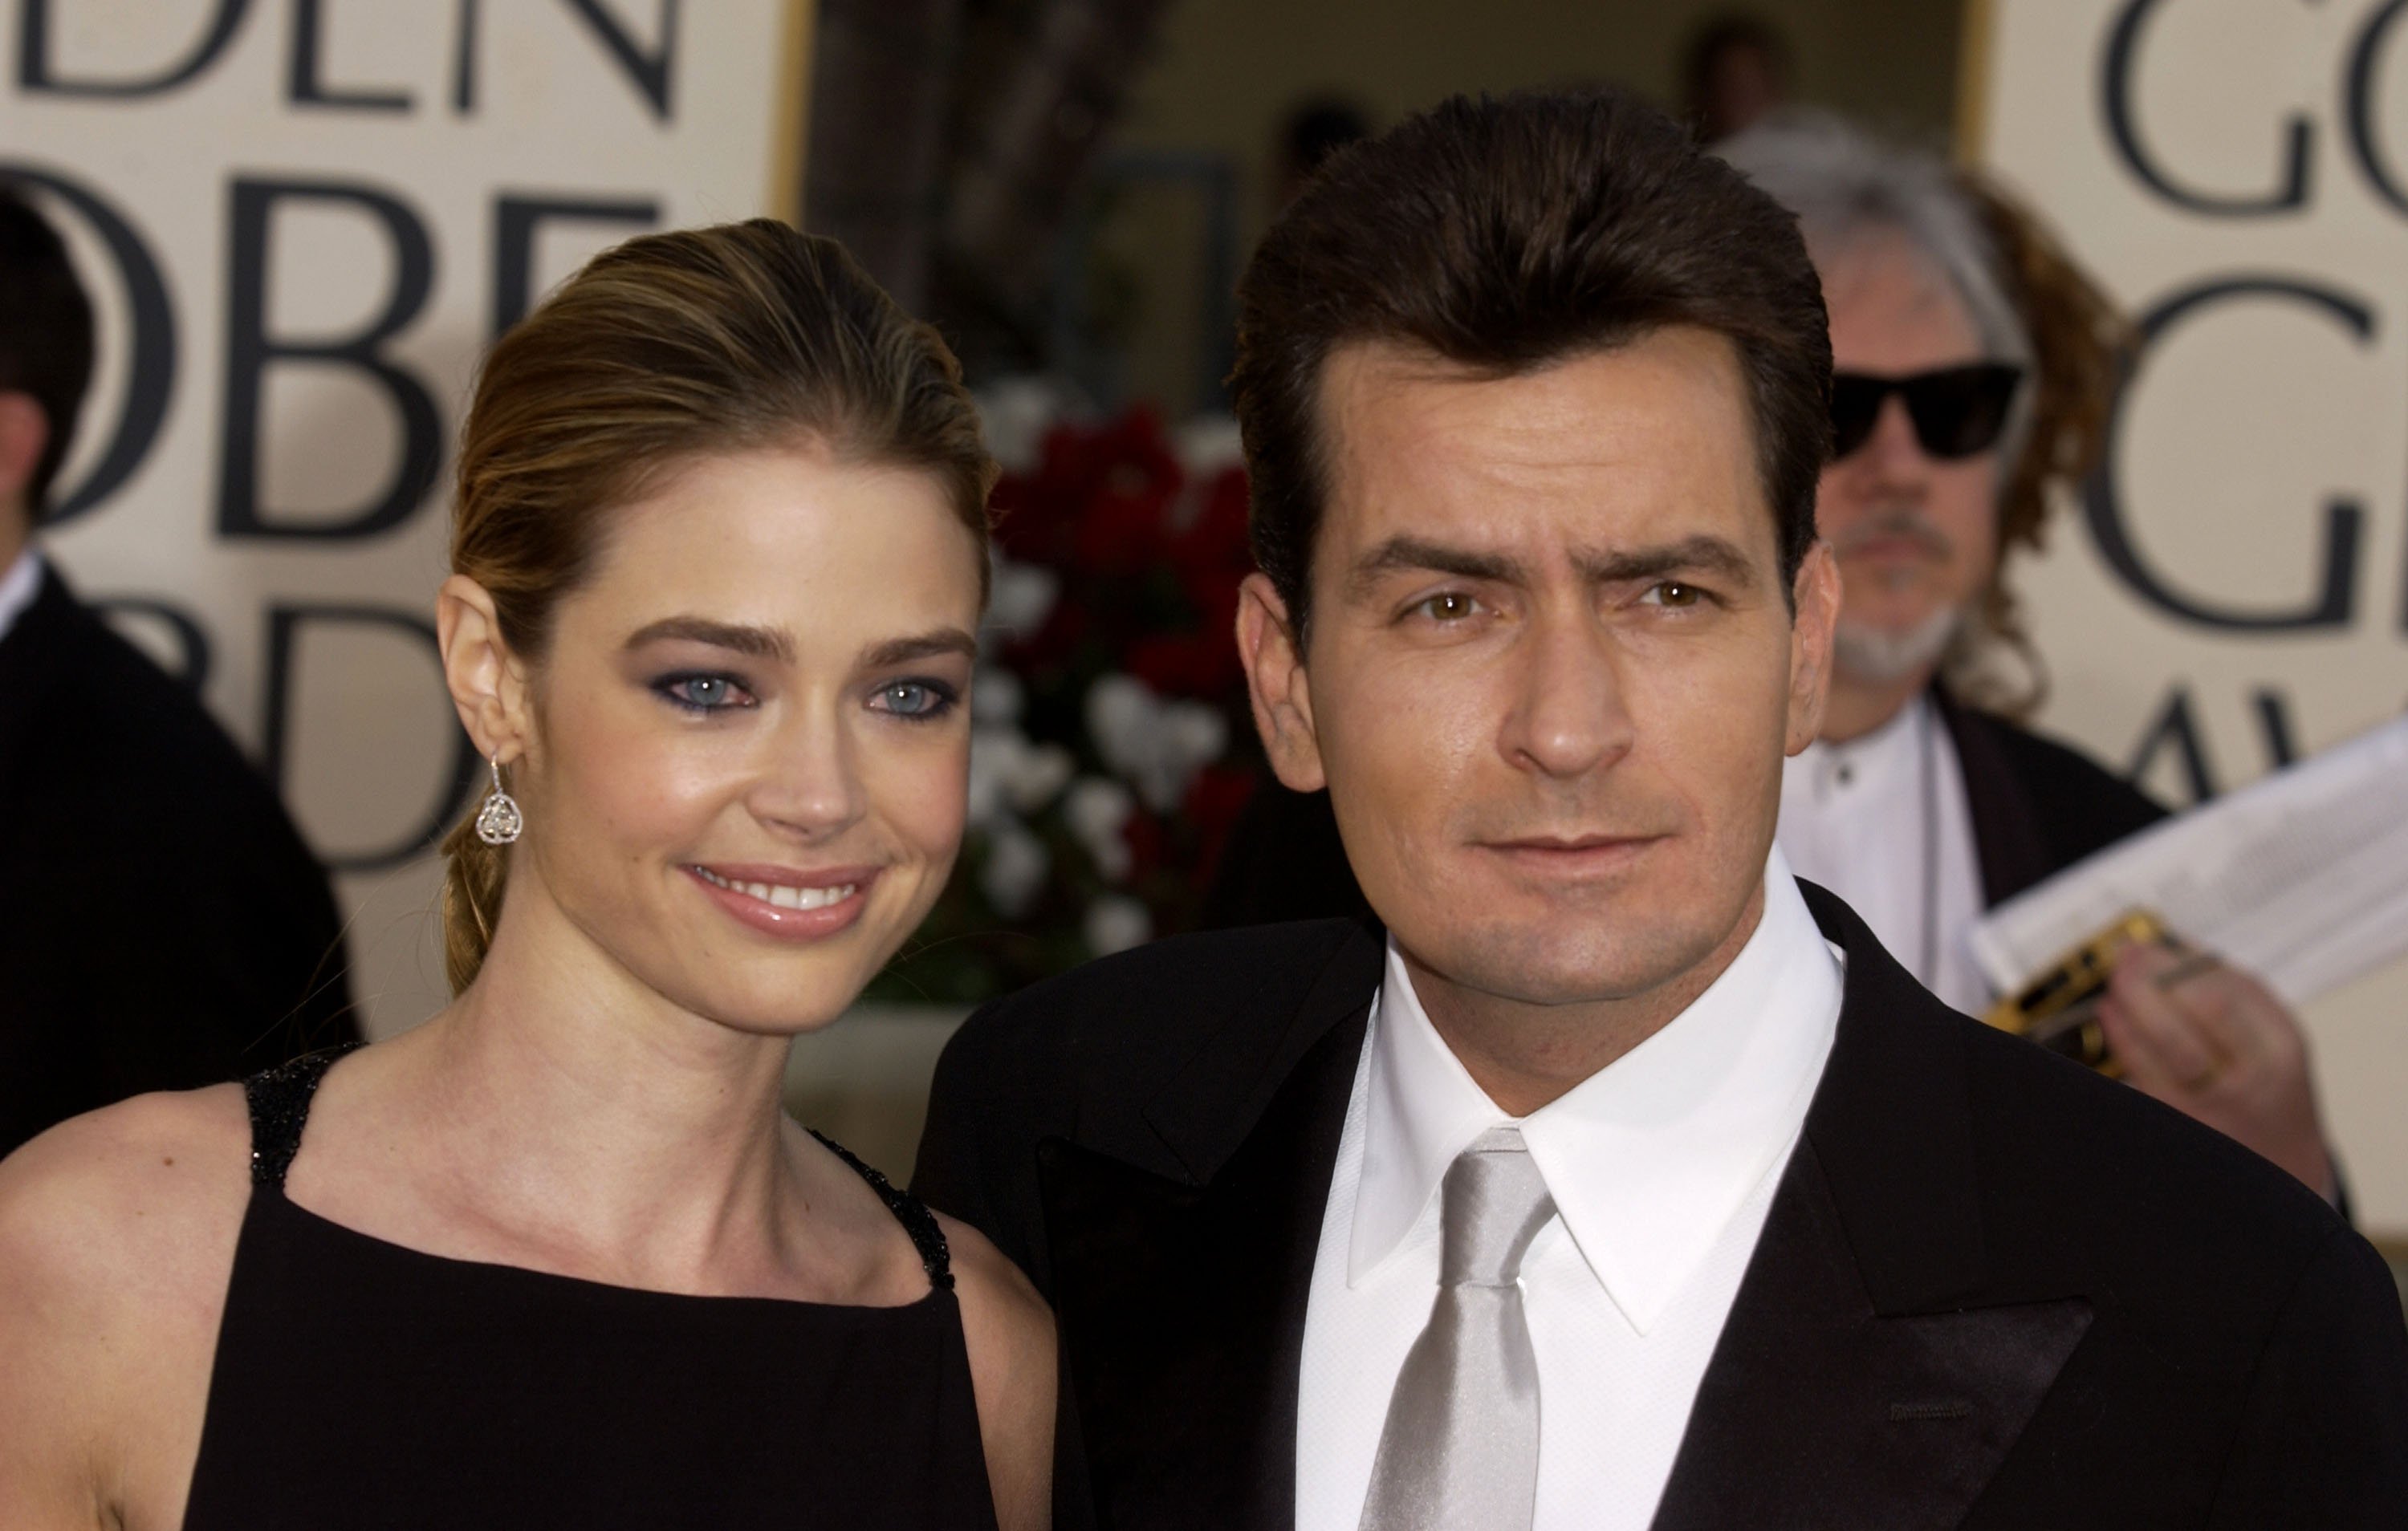 ‘RHOBH’ Alum Denise Richards Revealed Her Ex Charlie Sheen Had ‘A Bit of a Dilemma’ With Their First Date